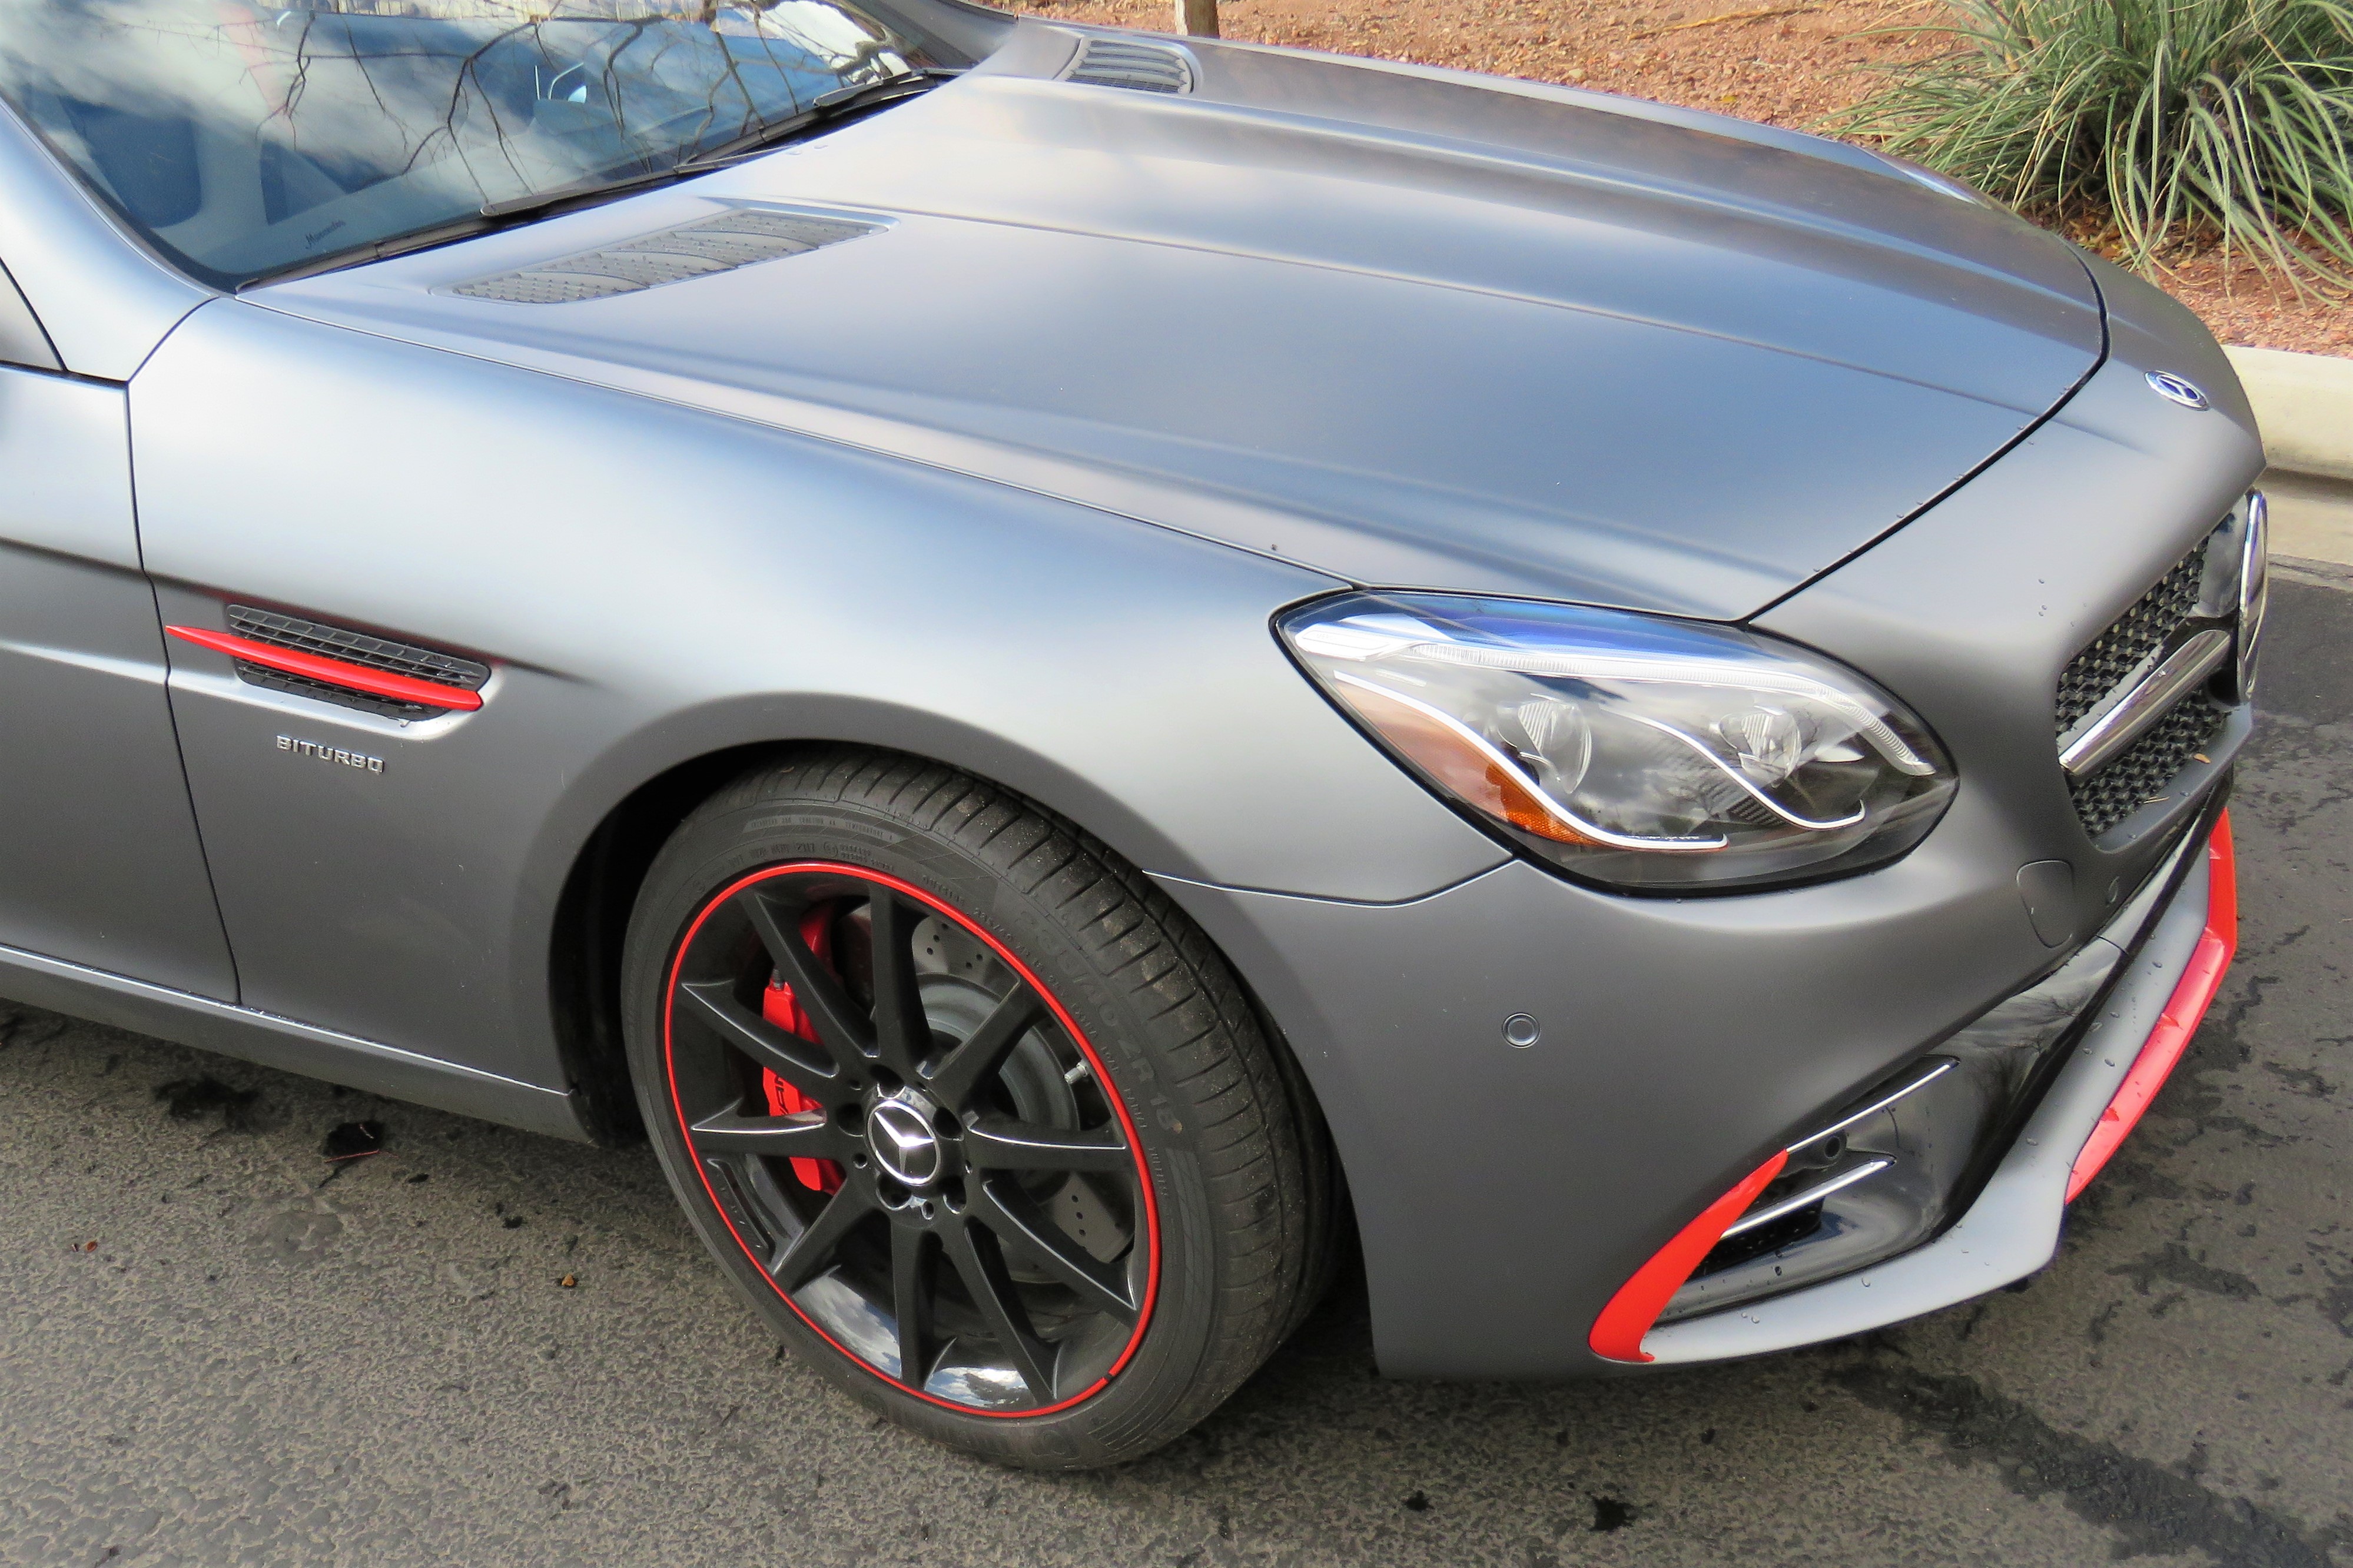 , AMG dials in new SLC43 roadster with turbo-V6 instead of V8 muscle, ClassicCars.com Journal